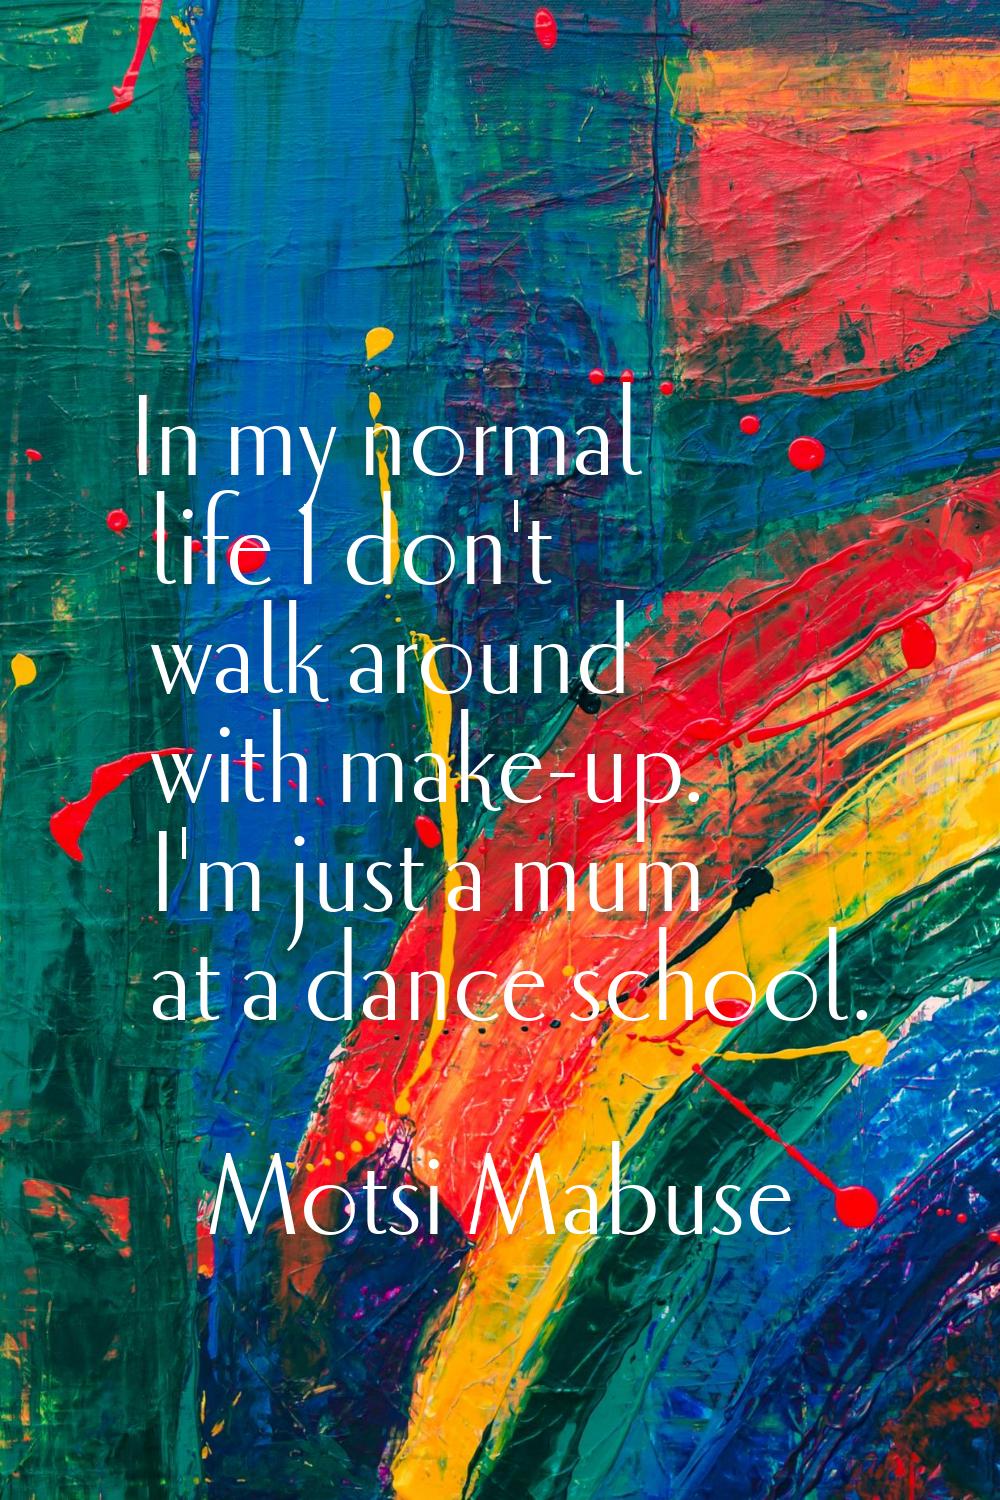 In my normal life I don't walk around with make-up. I'm just a mum at a dance school.